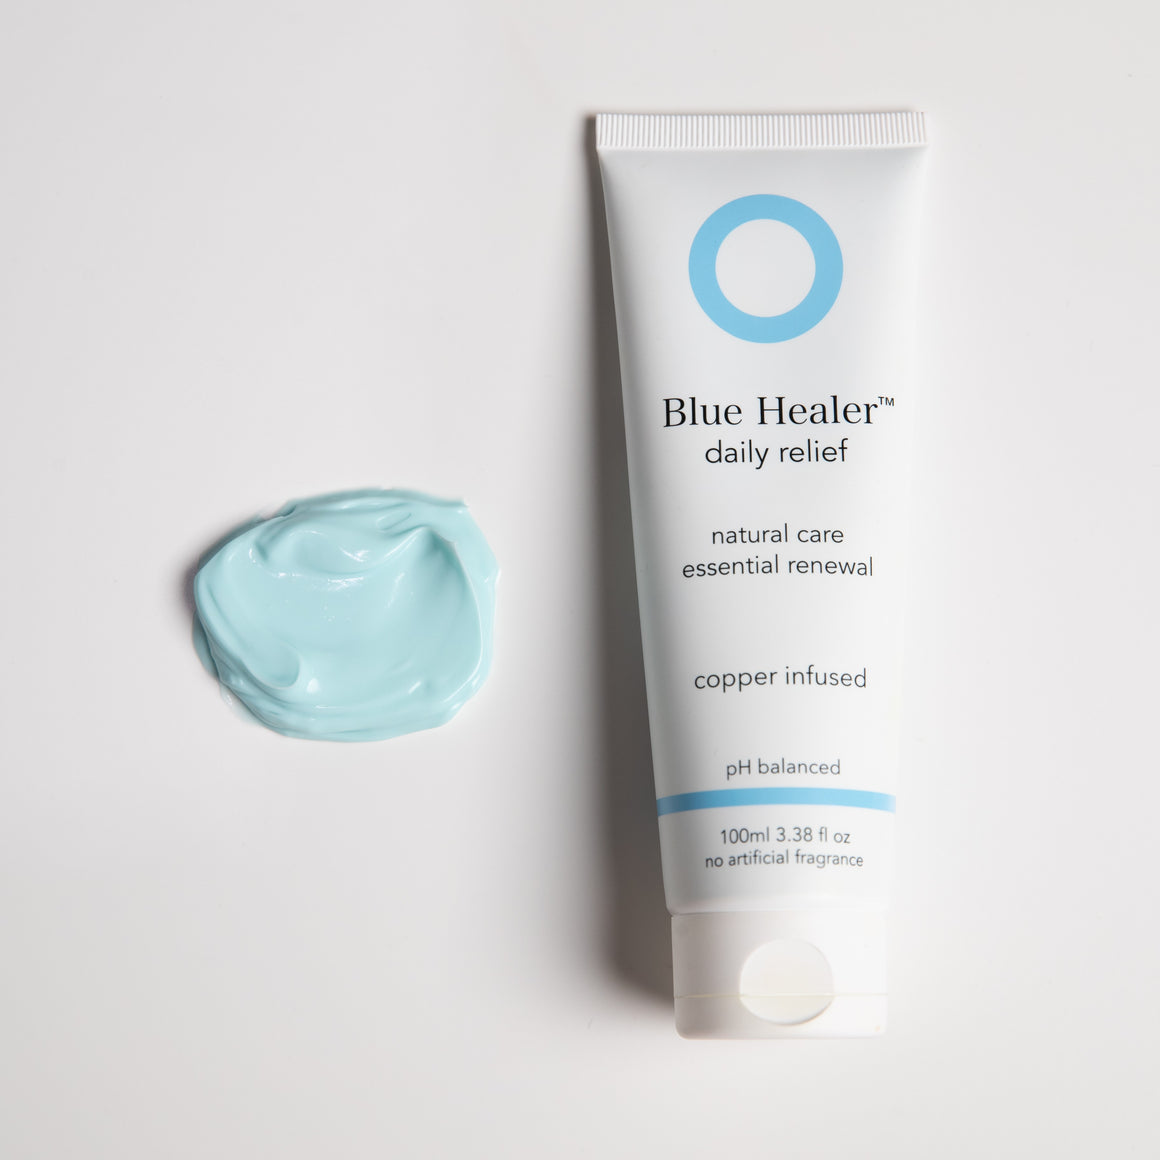 Blue Healer daily relief product tube next to a dollop of the naturally blue, shiny cream, 100 ml size. Relief, renewal and sports or injury recovery cream. Vegan. Sensitive friendly.